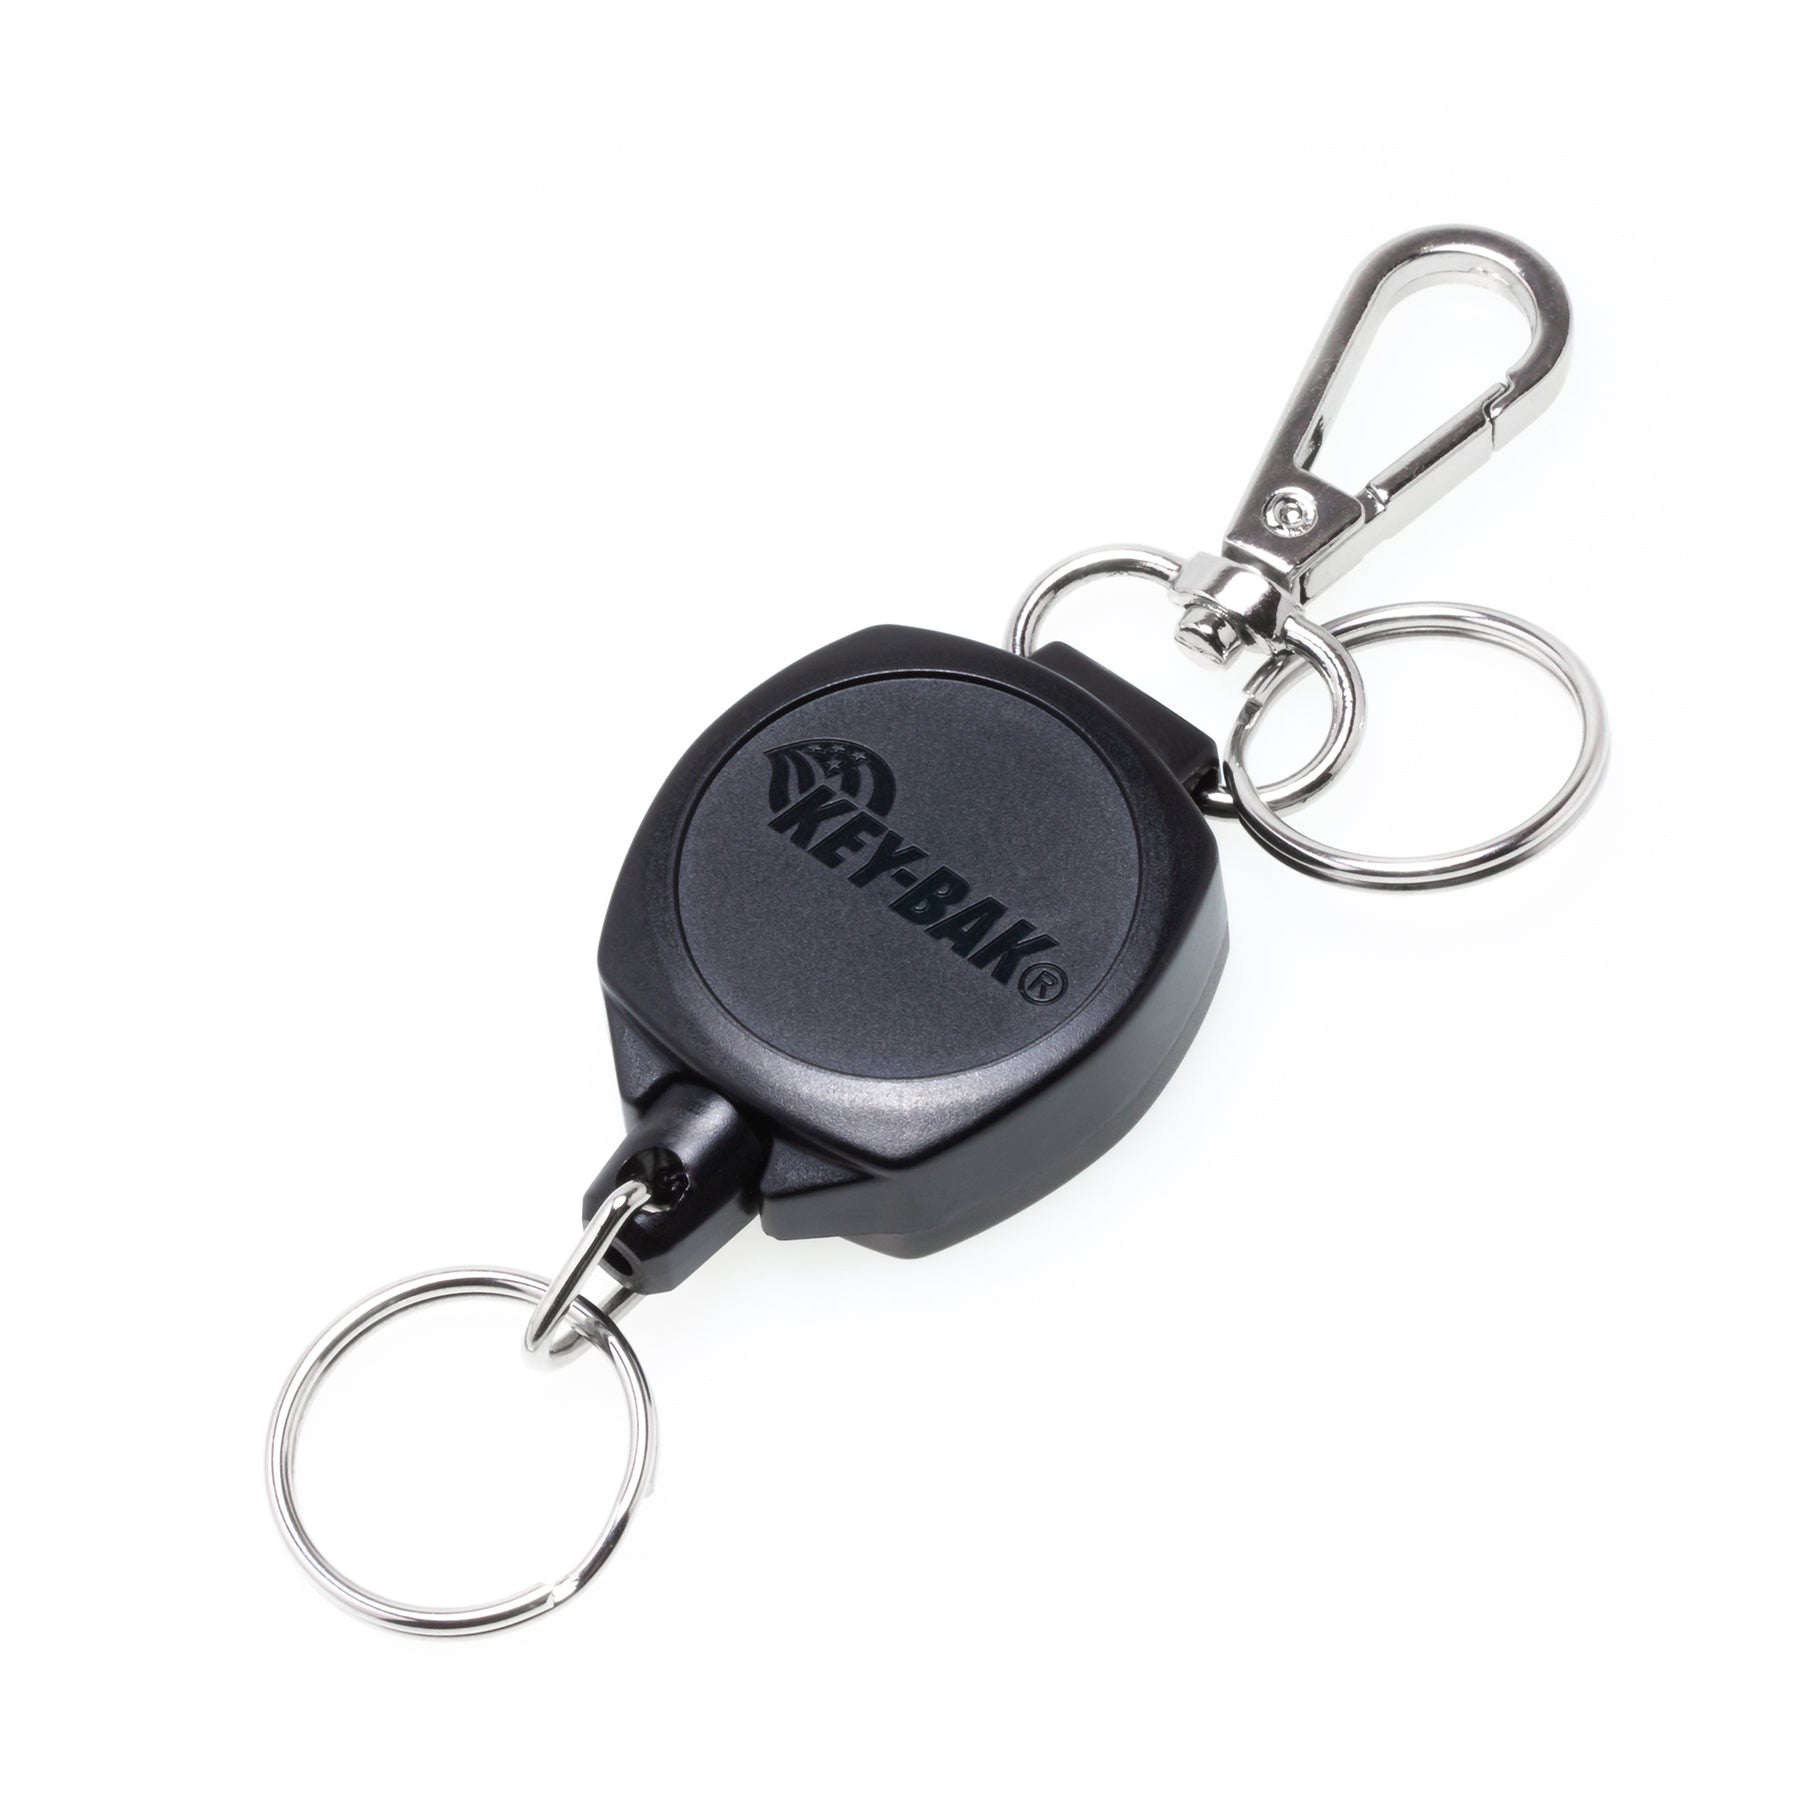 Shop for and Buy Heavy Duty Split Key Ring Nickel Plated 5/8 Inch